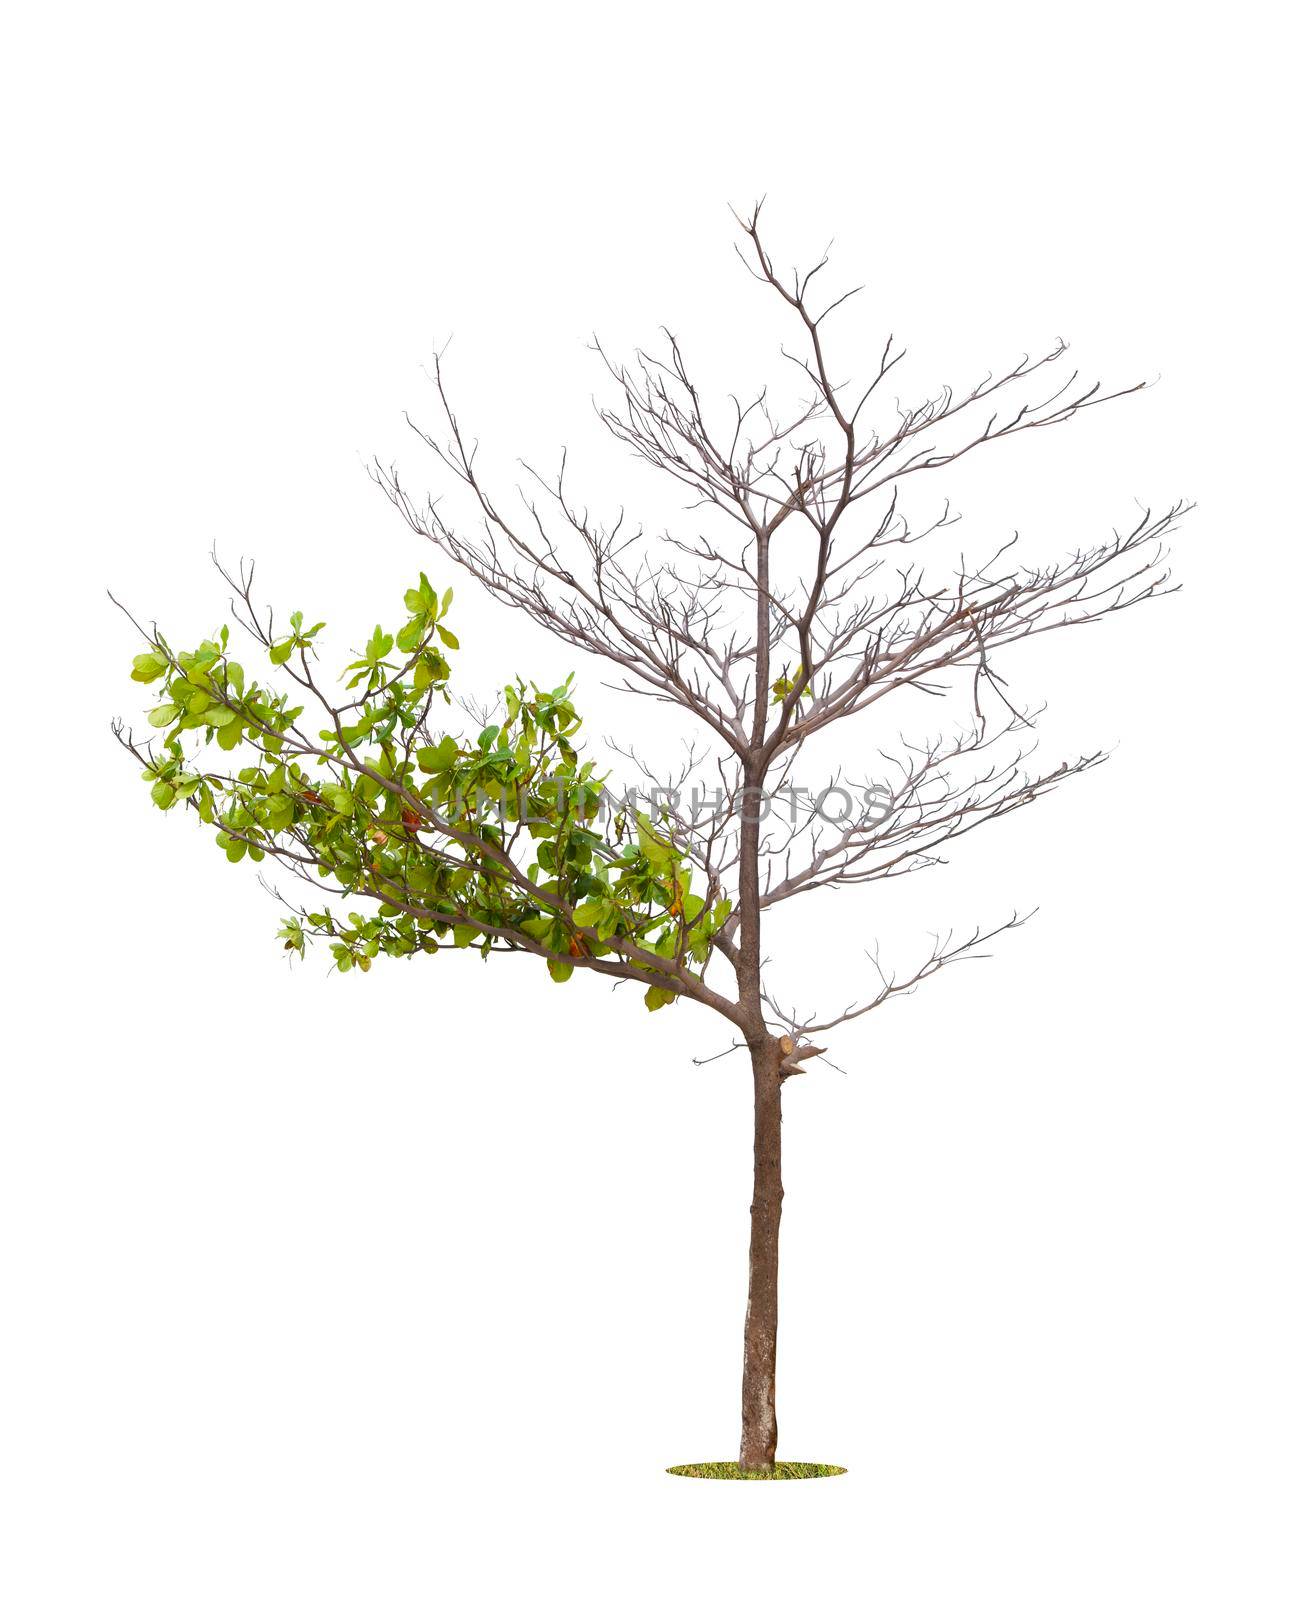 Dead tree on one side and living tree on the different side. Isolated on a white background.